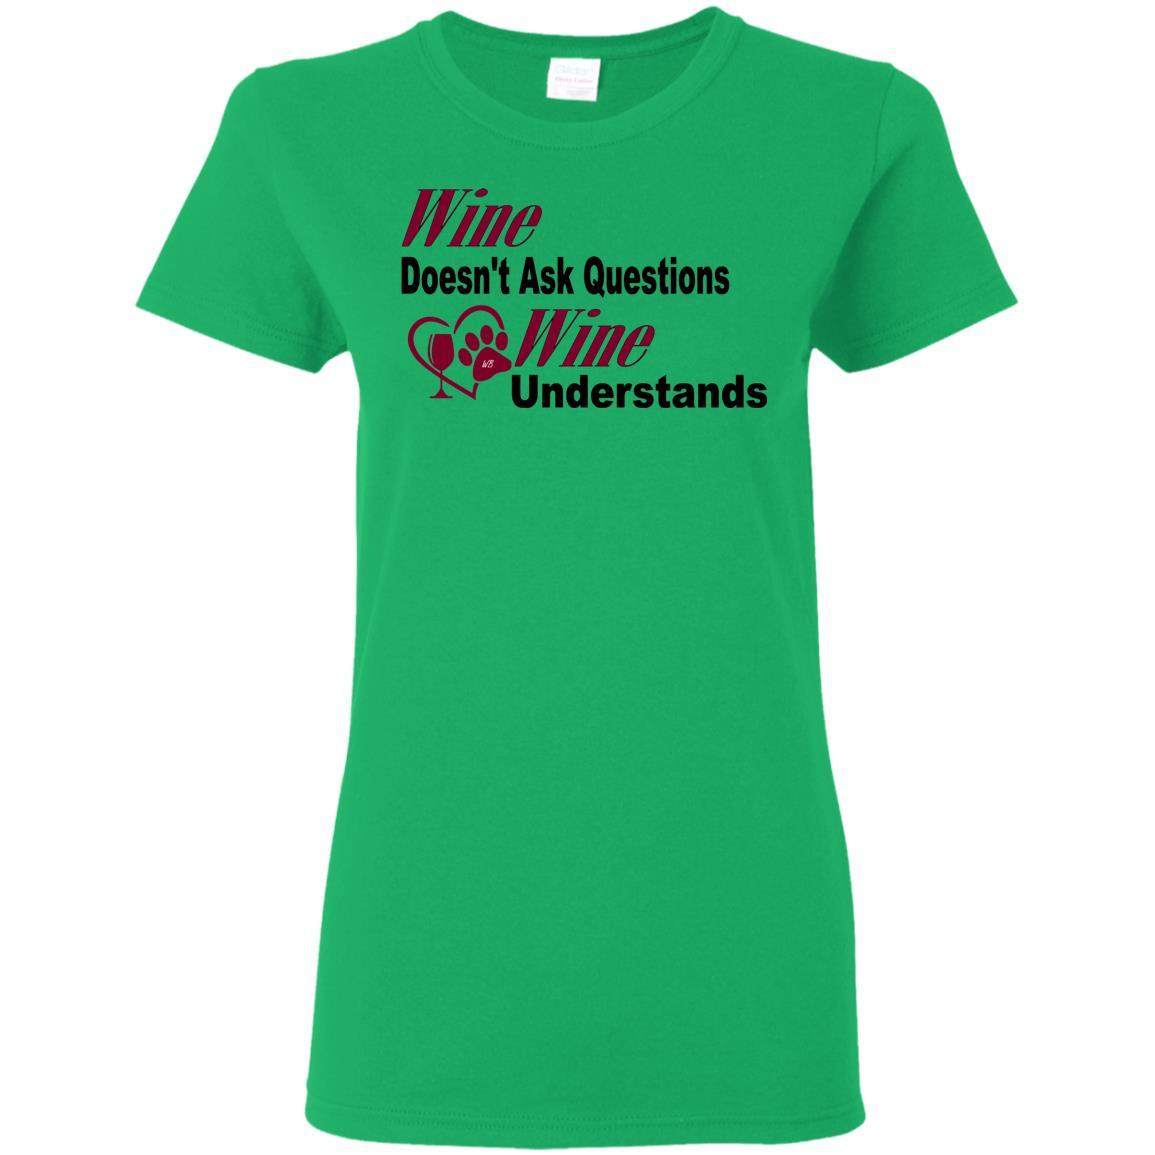 T-Shirts Irish Green / S WineyBitches.co "Wine Doesn't Ask Questions...Ladies' T-Shirt-Burg Lettering WineyBitchesCo